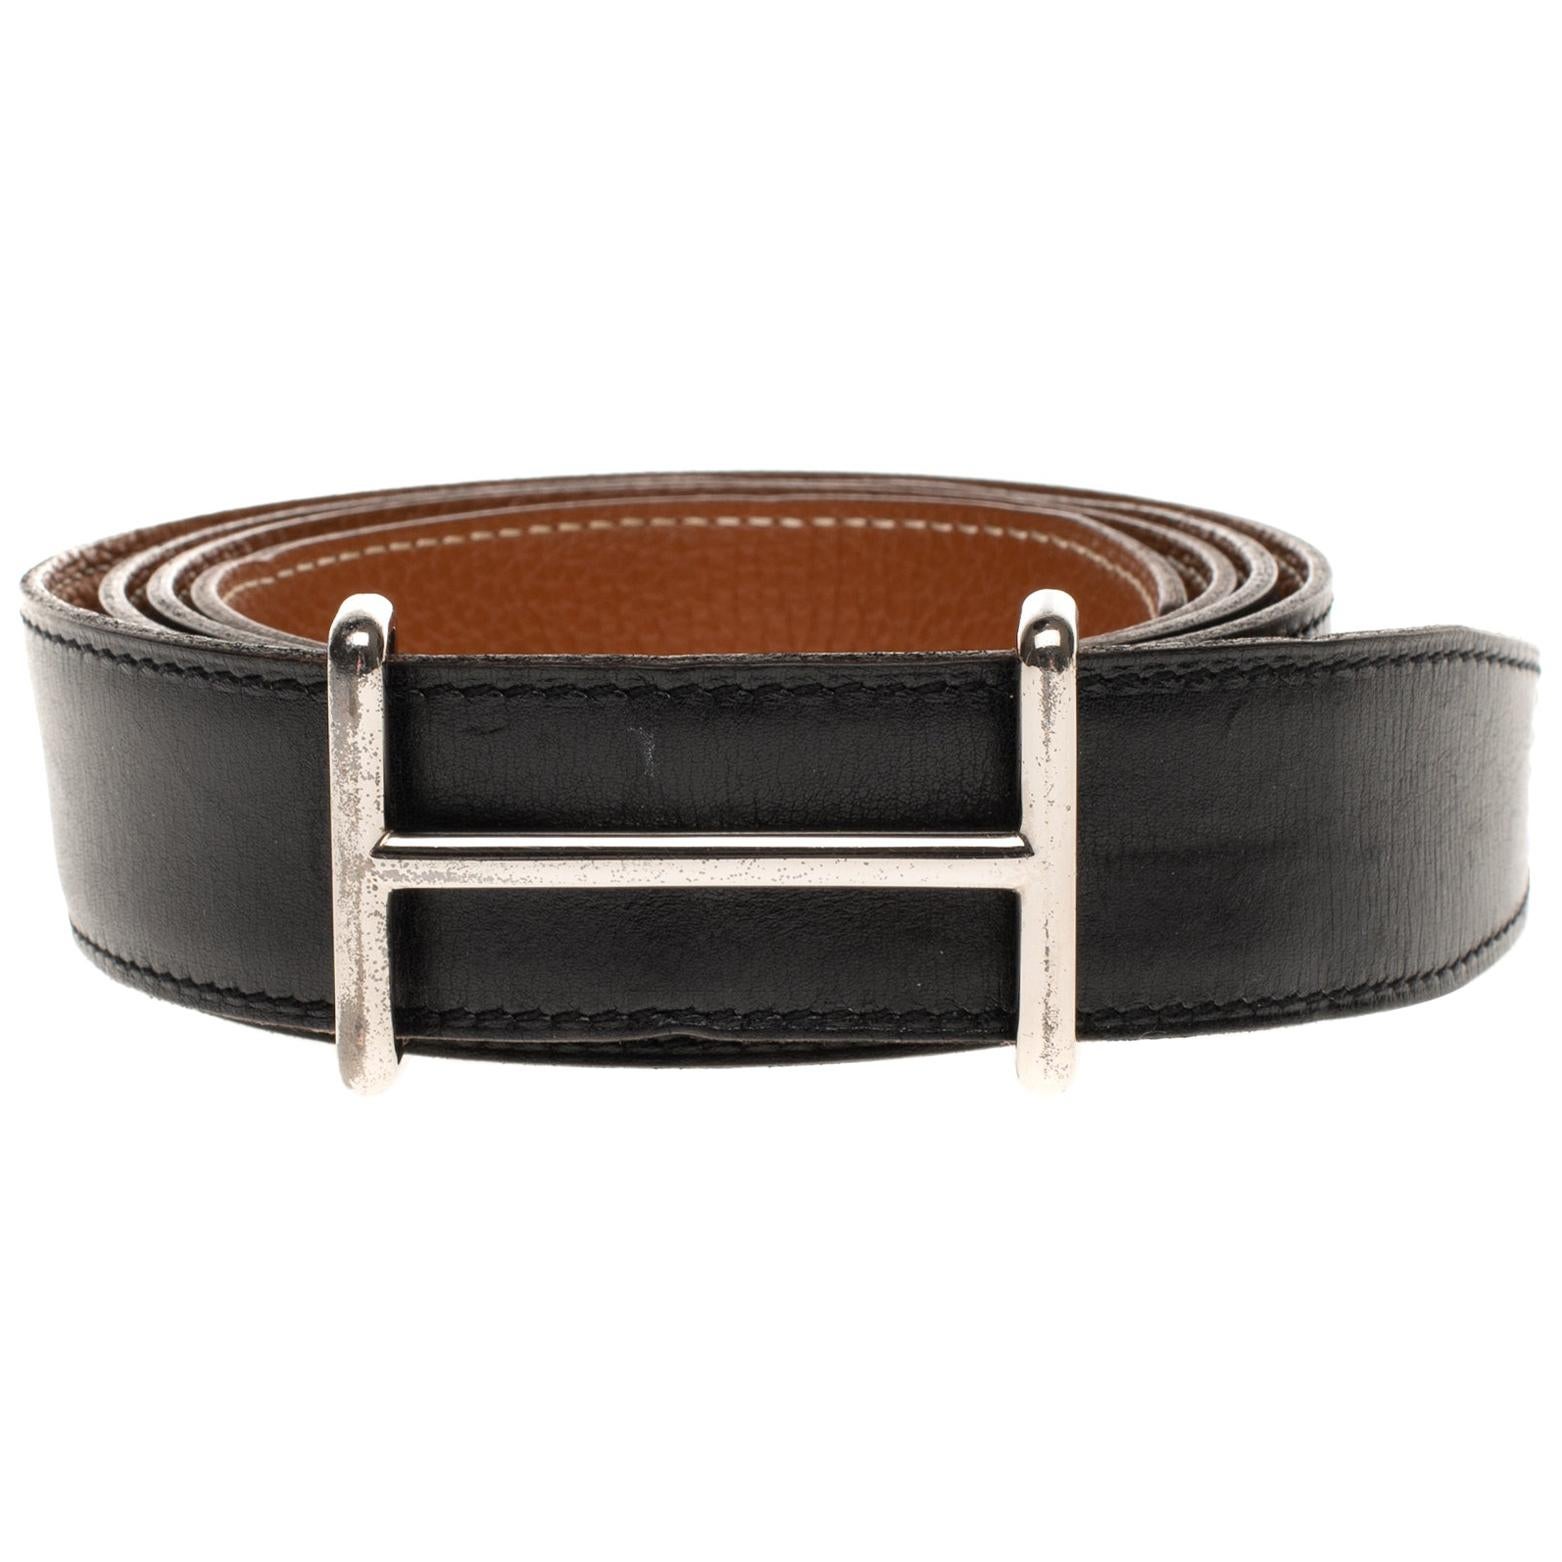 Hermès reversible belt in black calfskin & Togo gold with silvery large H buckle